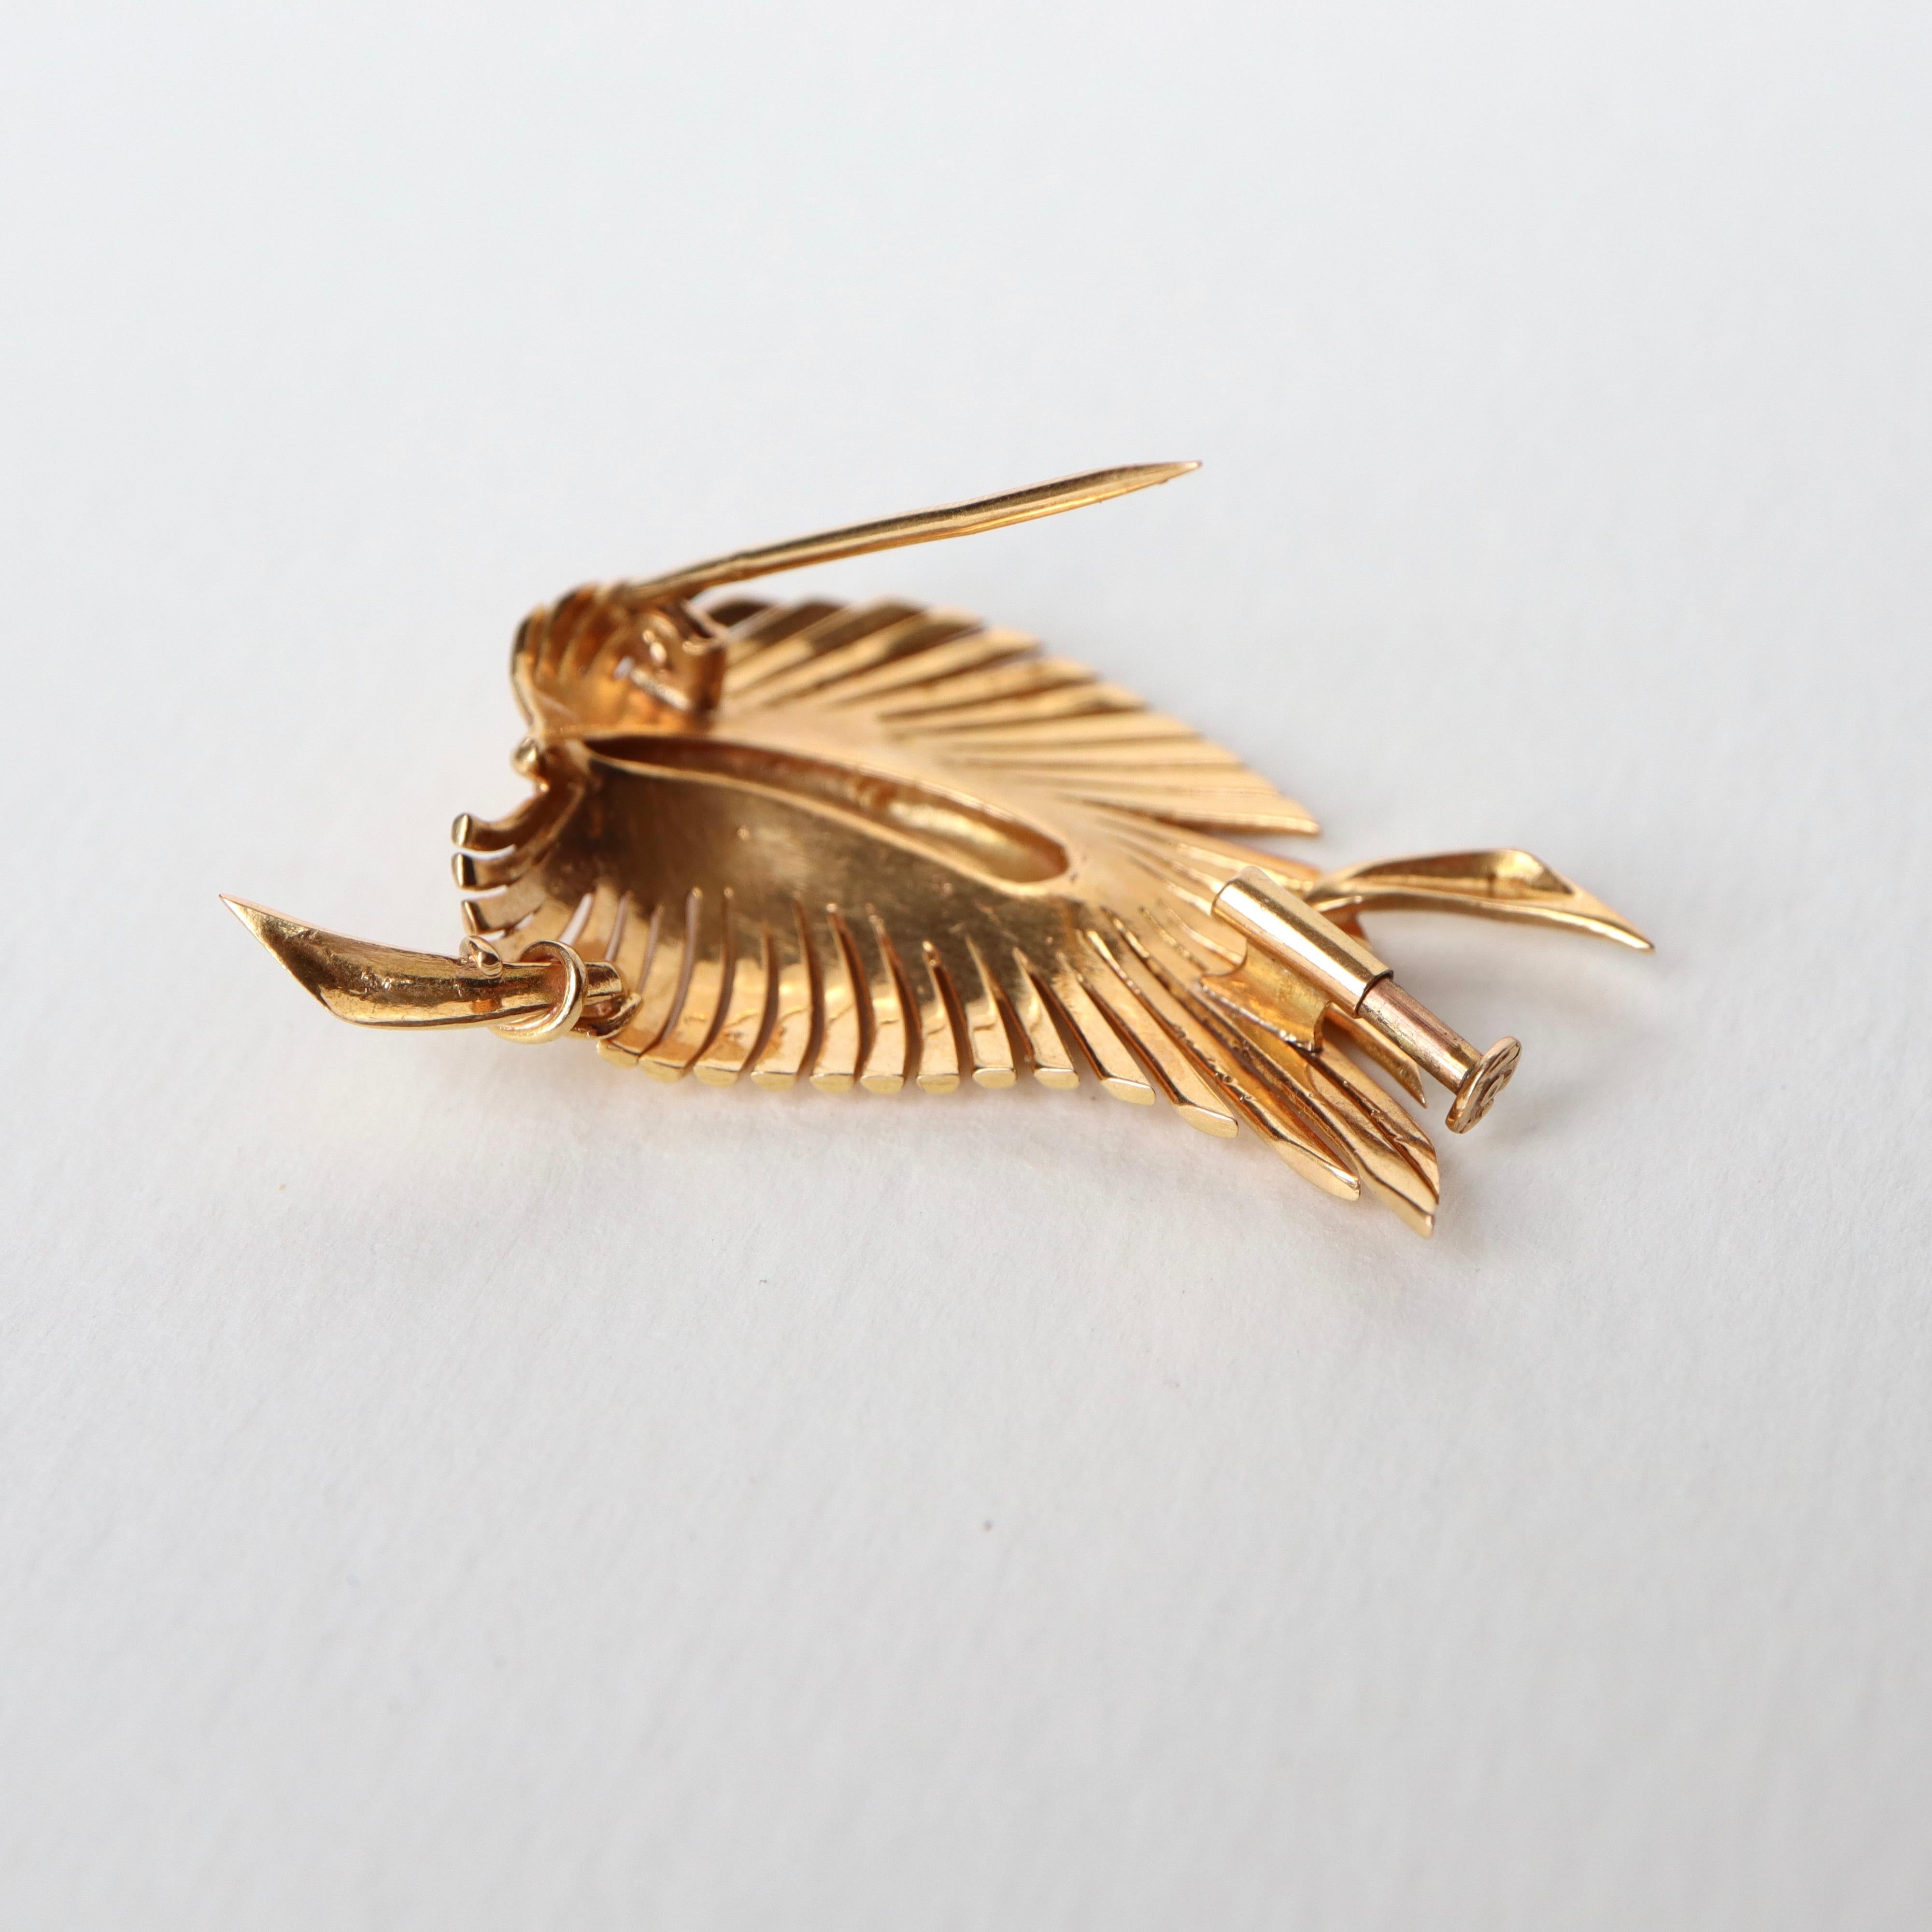 Leaf brooch in 18k yellow gold. The ribs are finely openwork. 
Eagle head hallmark, French-made jewel.
Gold weight: 7.1 g
Width: 4 cm height: 2.5 cm